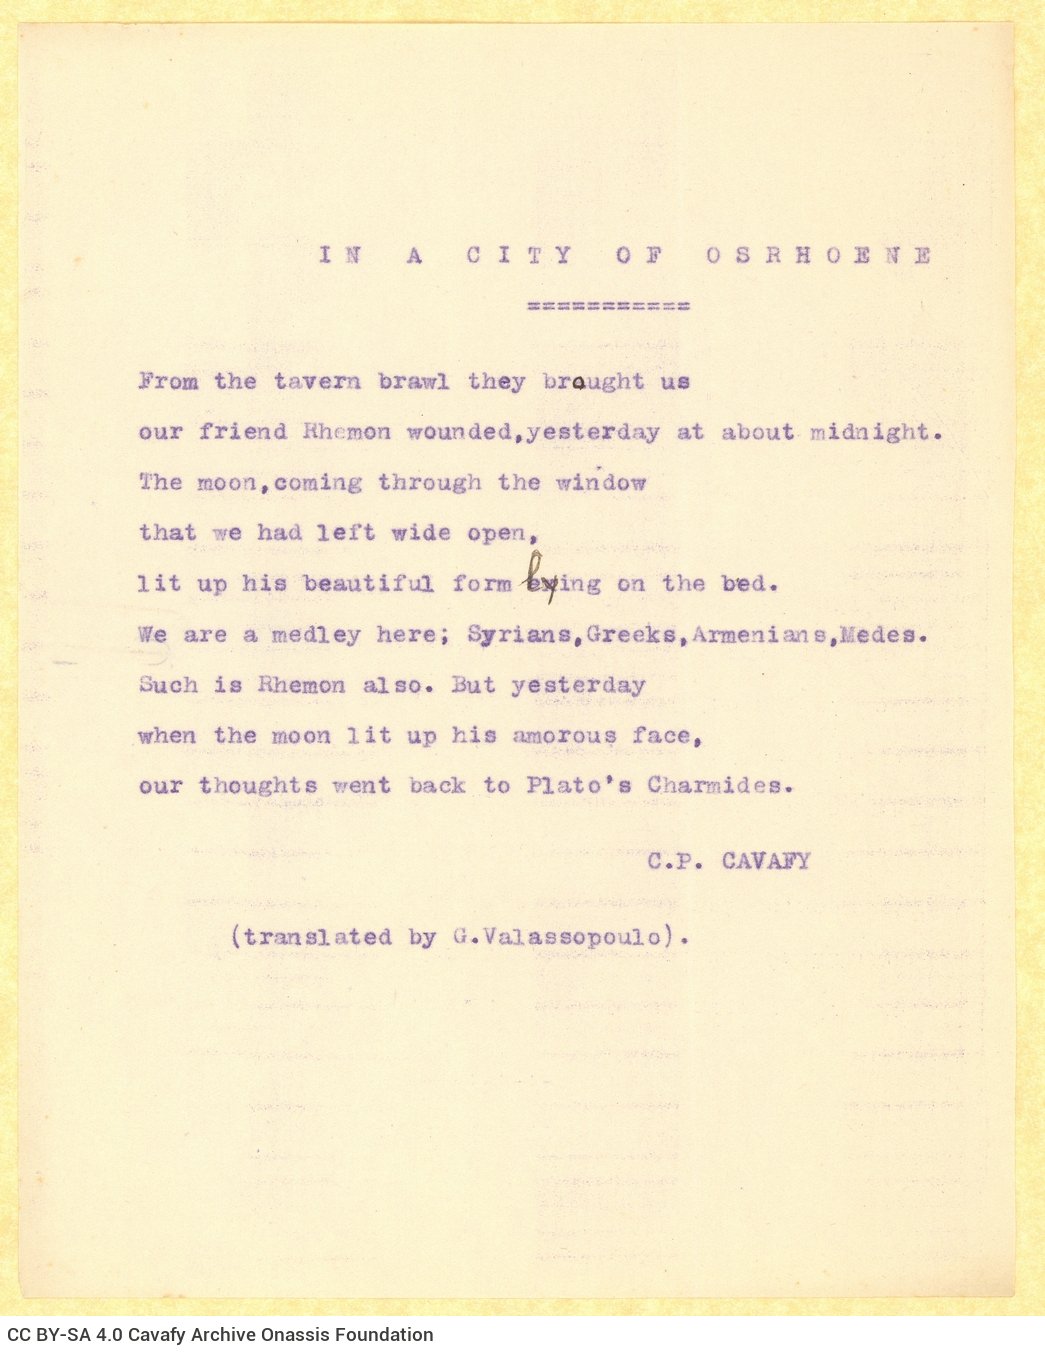 Typewritten English translation of the poem "In a City of Osrhoene" by G. Valassopoulo on one side of a sheet; handwritten